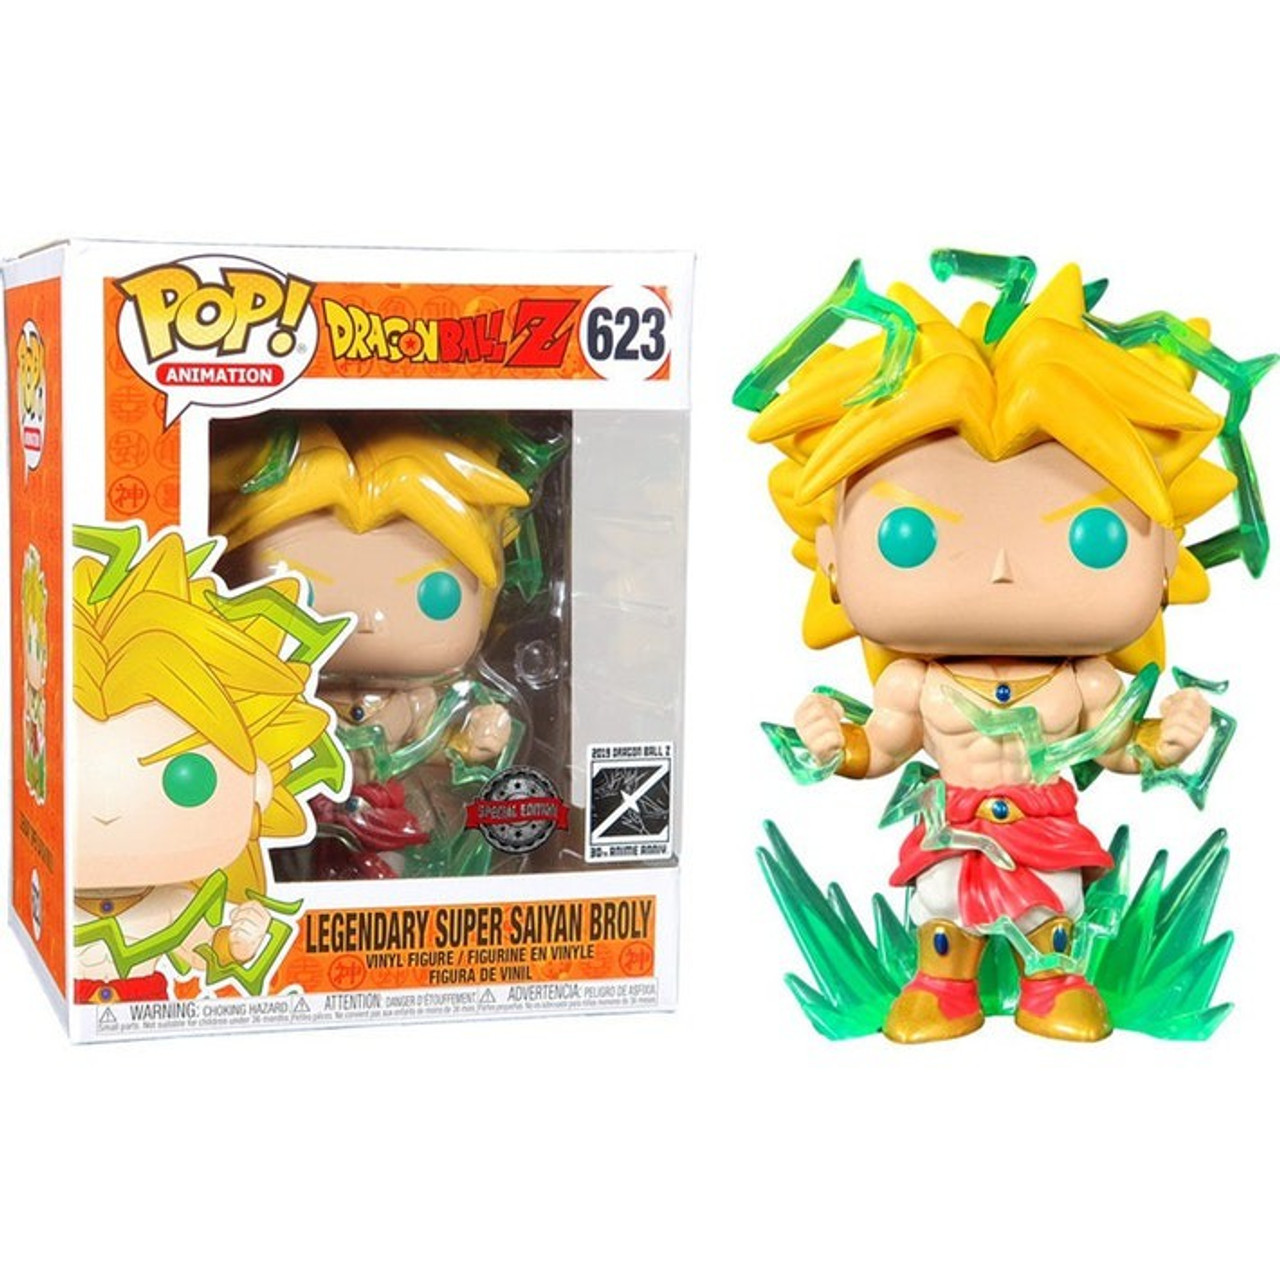 Funko Dragon Ball Z Pop Animation Broly Exclusive 6 Vinyl Figure 623 Super Sized Toywiz - codes for assassin roblox 2018 october music codes for roblox sunflower